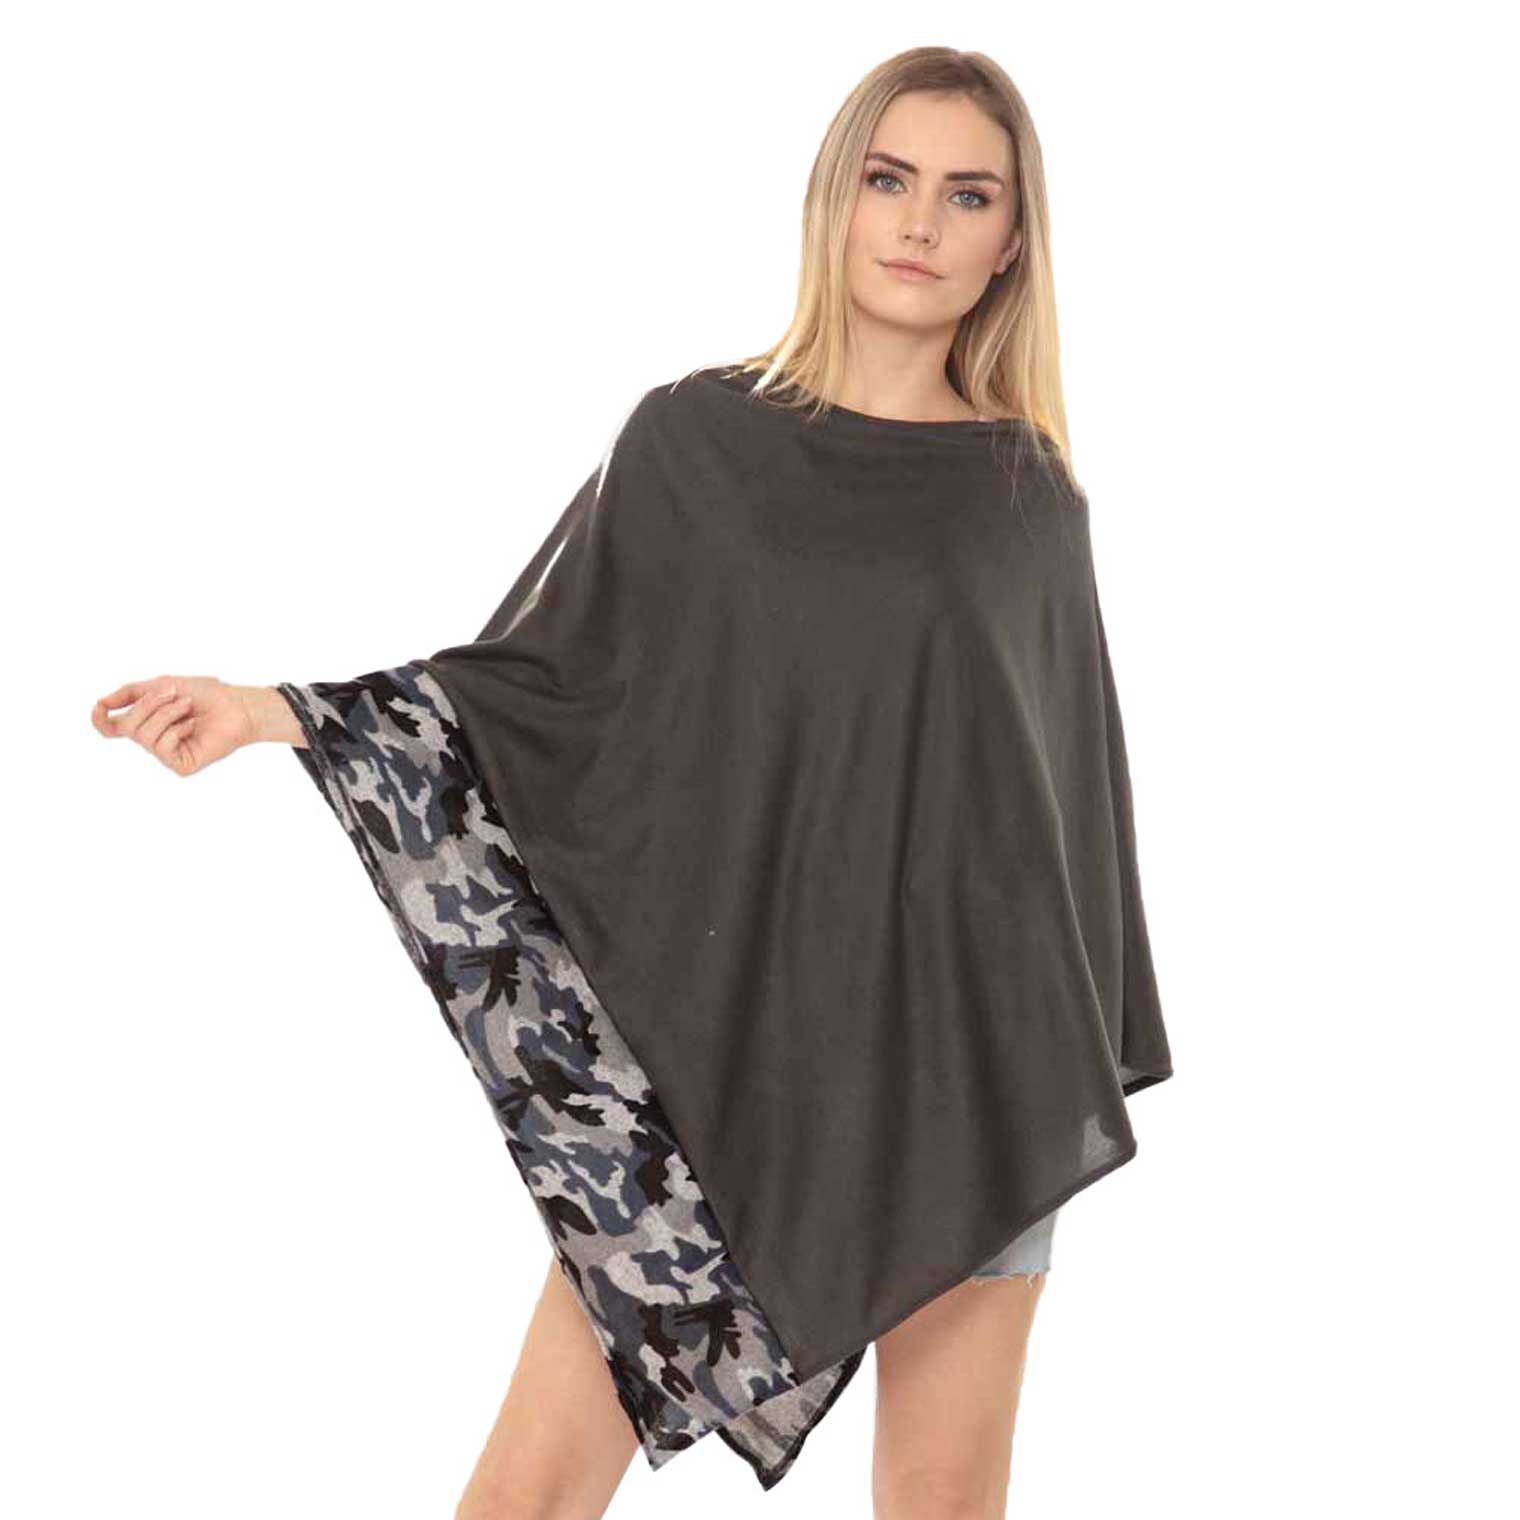 Black Camouflage Pattern Trim Poncho, This timeless trim Poncho is Soft, Lightweight and Breathable Fabric, Close to Skin, Comfortable to Wear. Sophisticated, flattering and cozy, this Poncho drapes beautifully for a relaxed, pulled-together look. Suitable for Weekend, Work, Holiday, Beach, Party, Club, Night, Evening, Date, Casual and Other Occasions in Spring, Summer and Autumn.